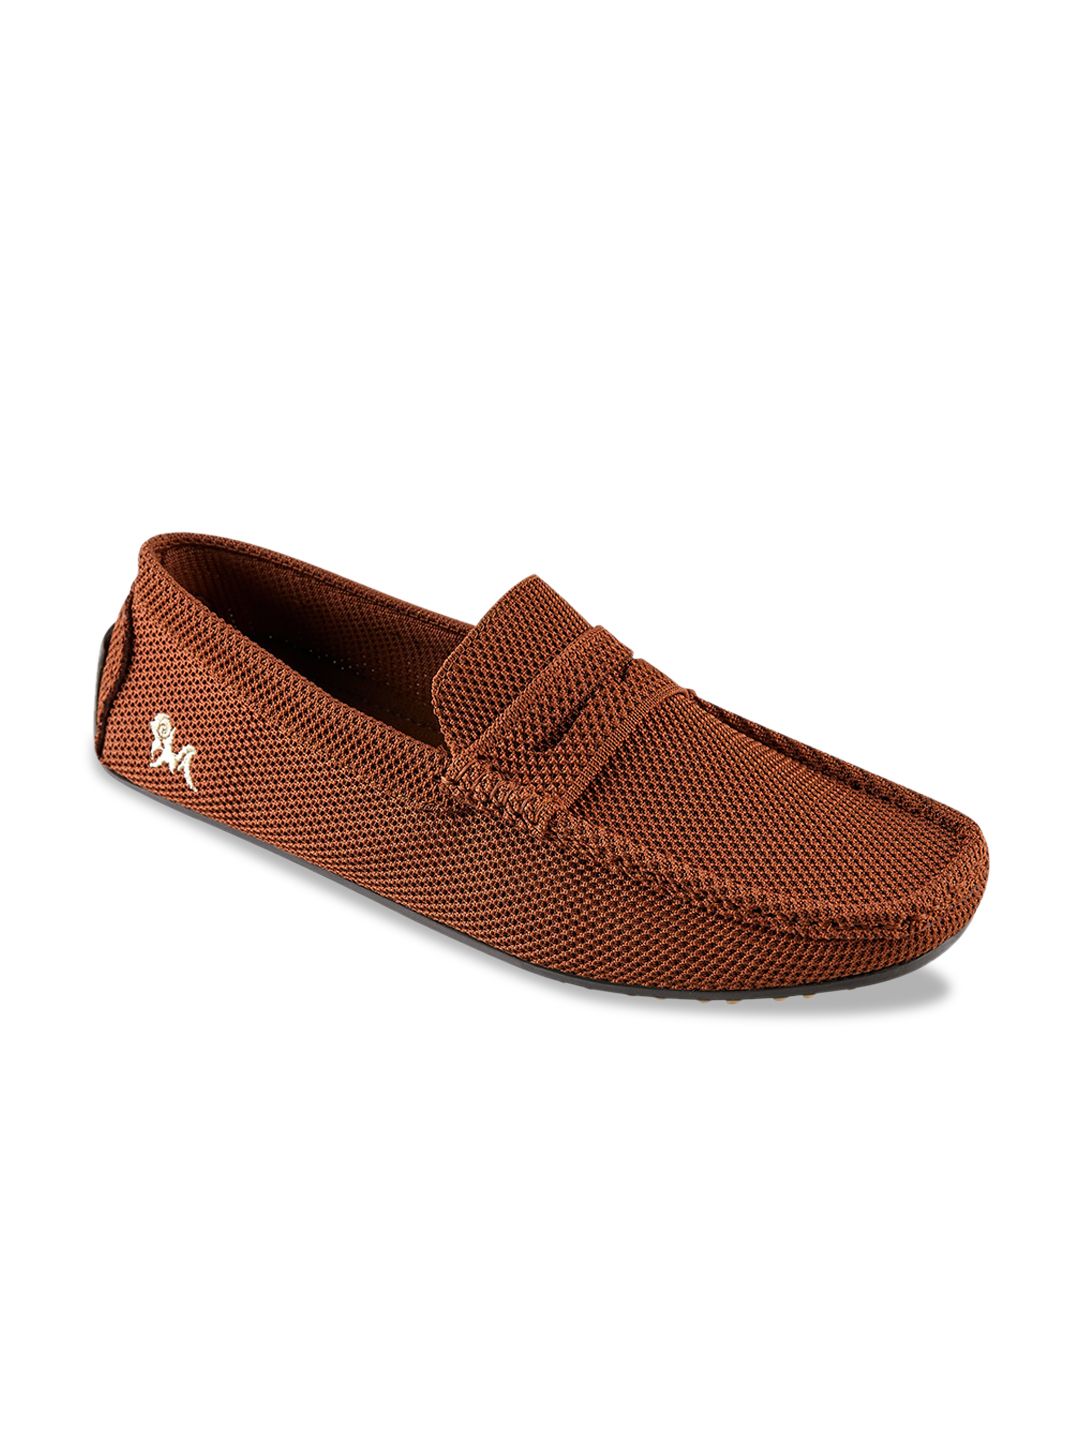 NEEMANS Lightweight Knitted Loafers Price in India